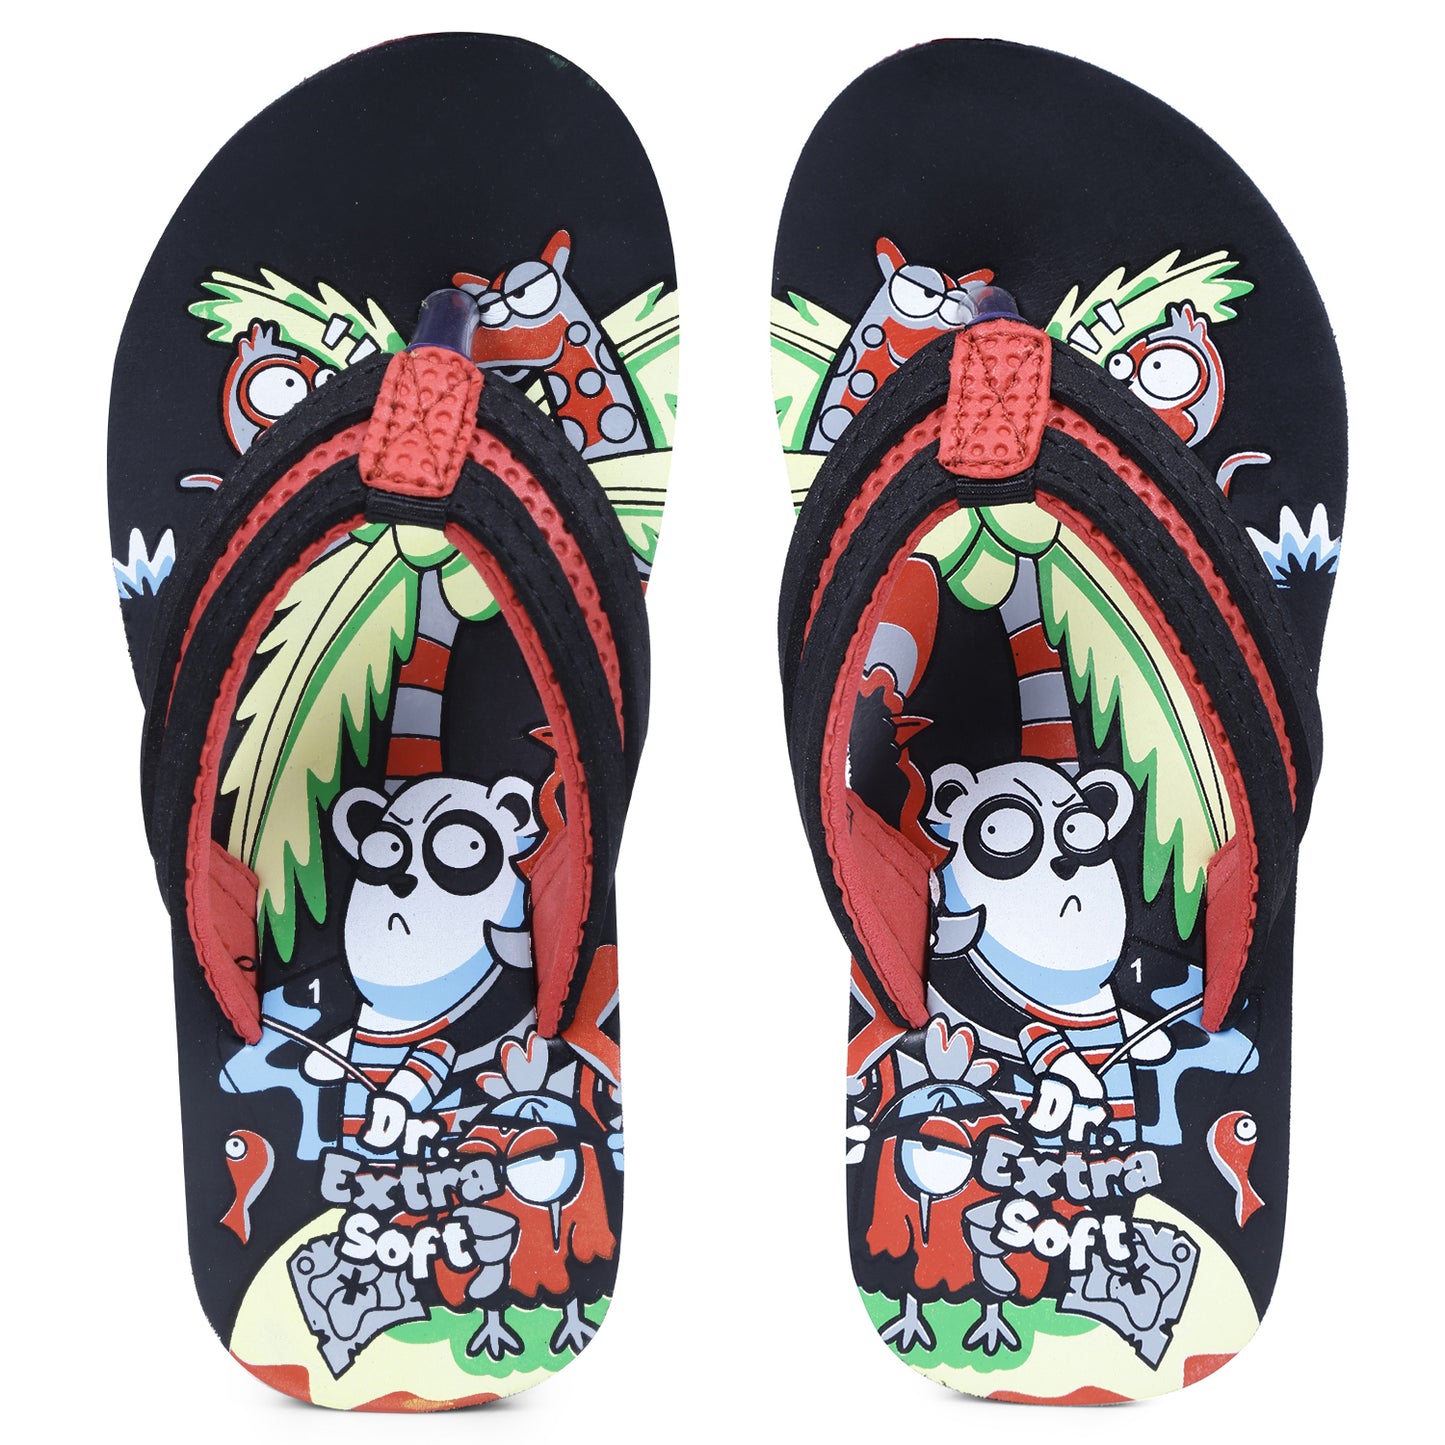 DOCTOR EXTRA SOFT Unisex-Child Kids Flip-Flop (Jungle Print) Soft Comfortable Indoor & Outdoor Slippers Stylish Non-Slip Slide Home Casual Cool Cartoon Cute House Chappals For Boys & Girls